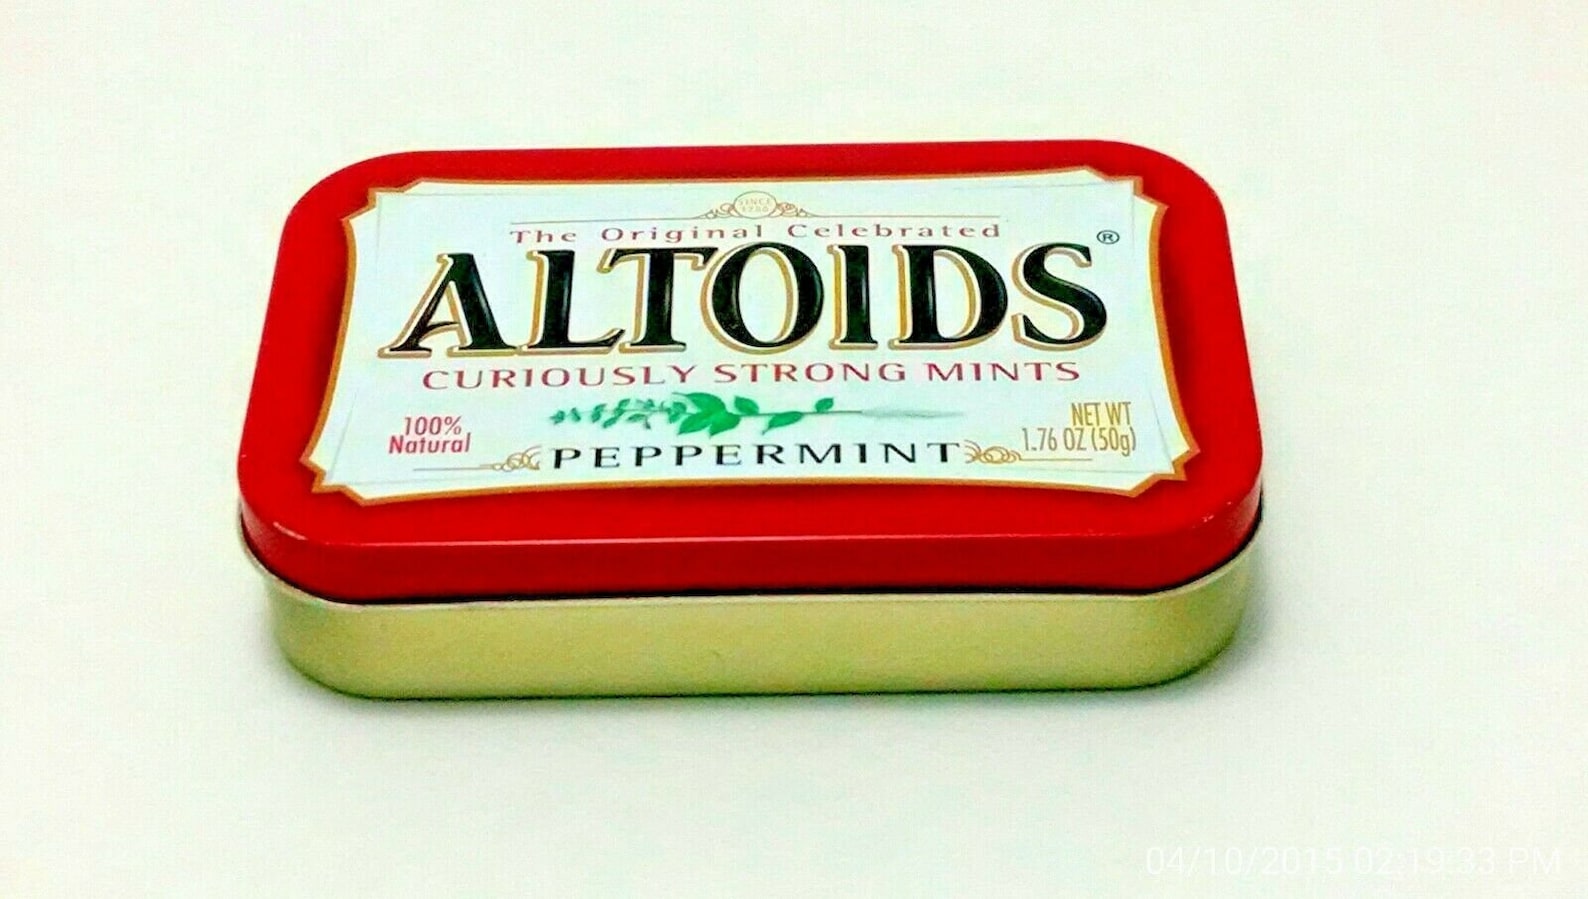 Lot of 10 ALTOIDS Peppermint Tins Empty Clean Matched - Etsy